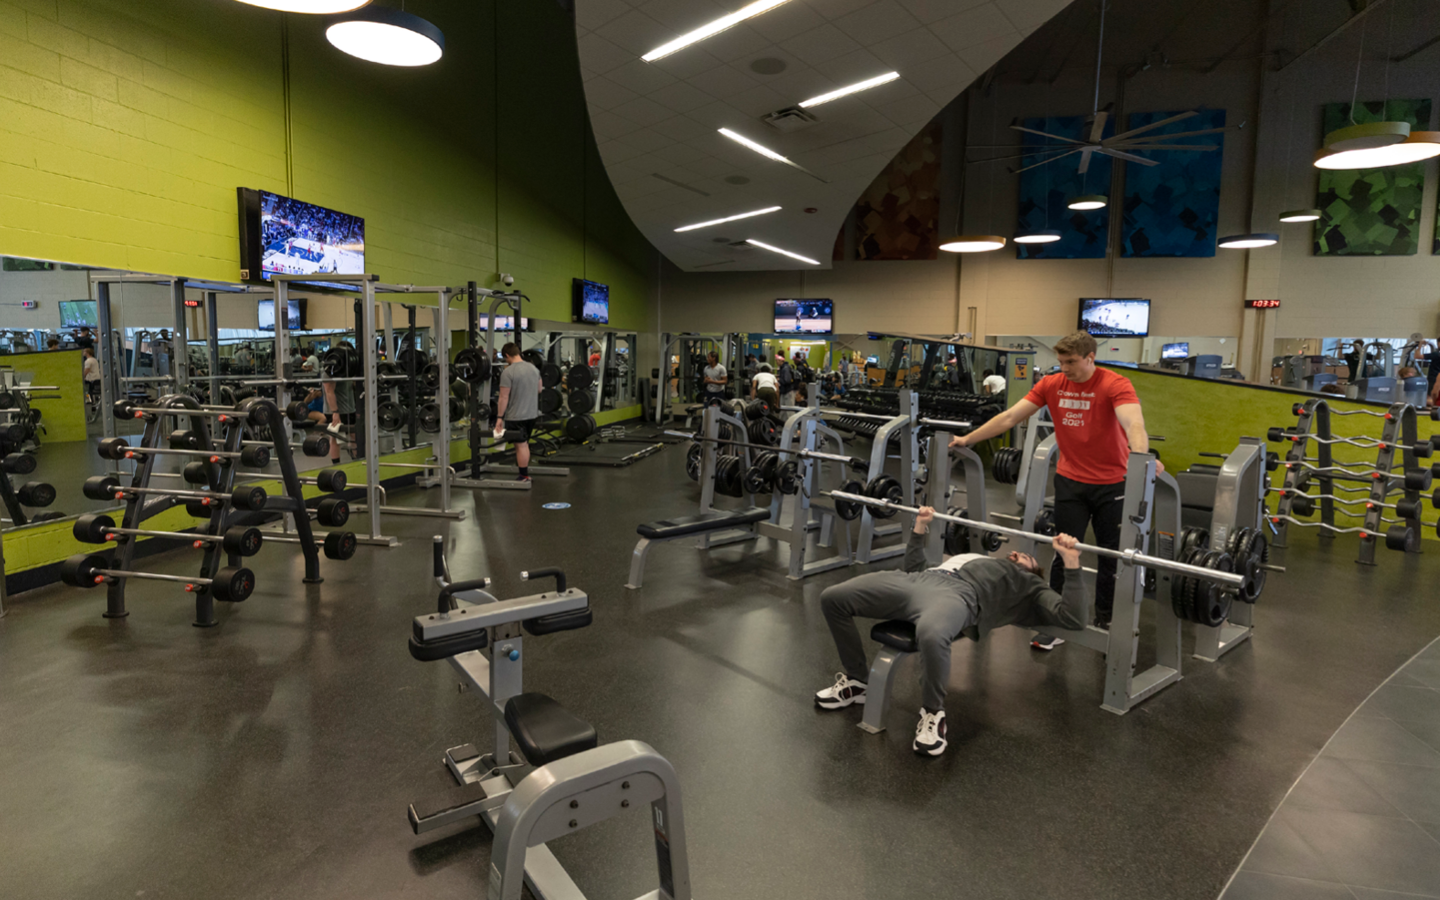 Wide view of fitness center facility